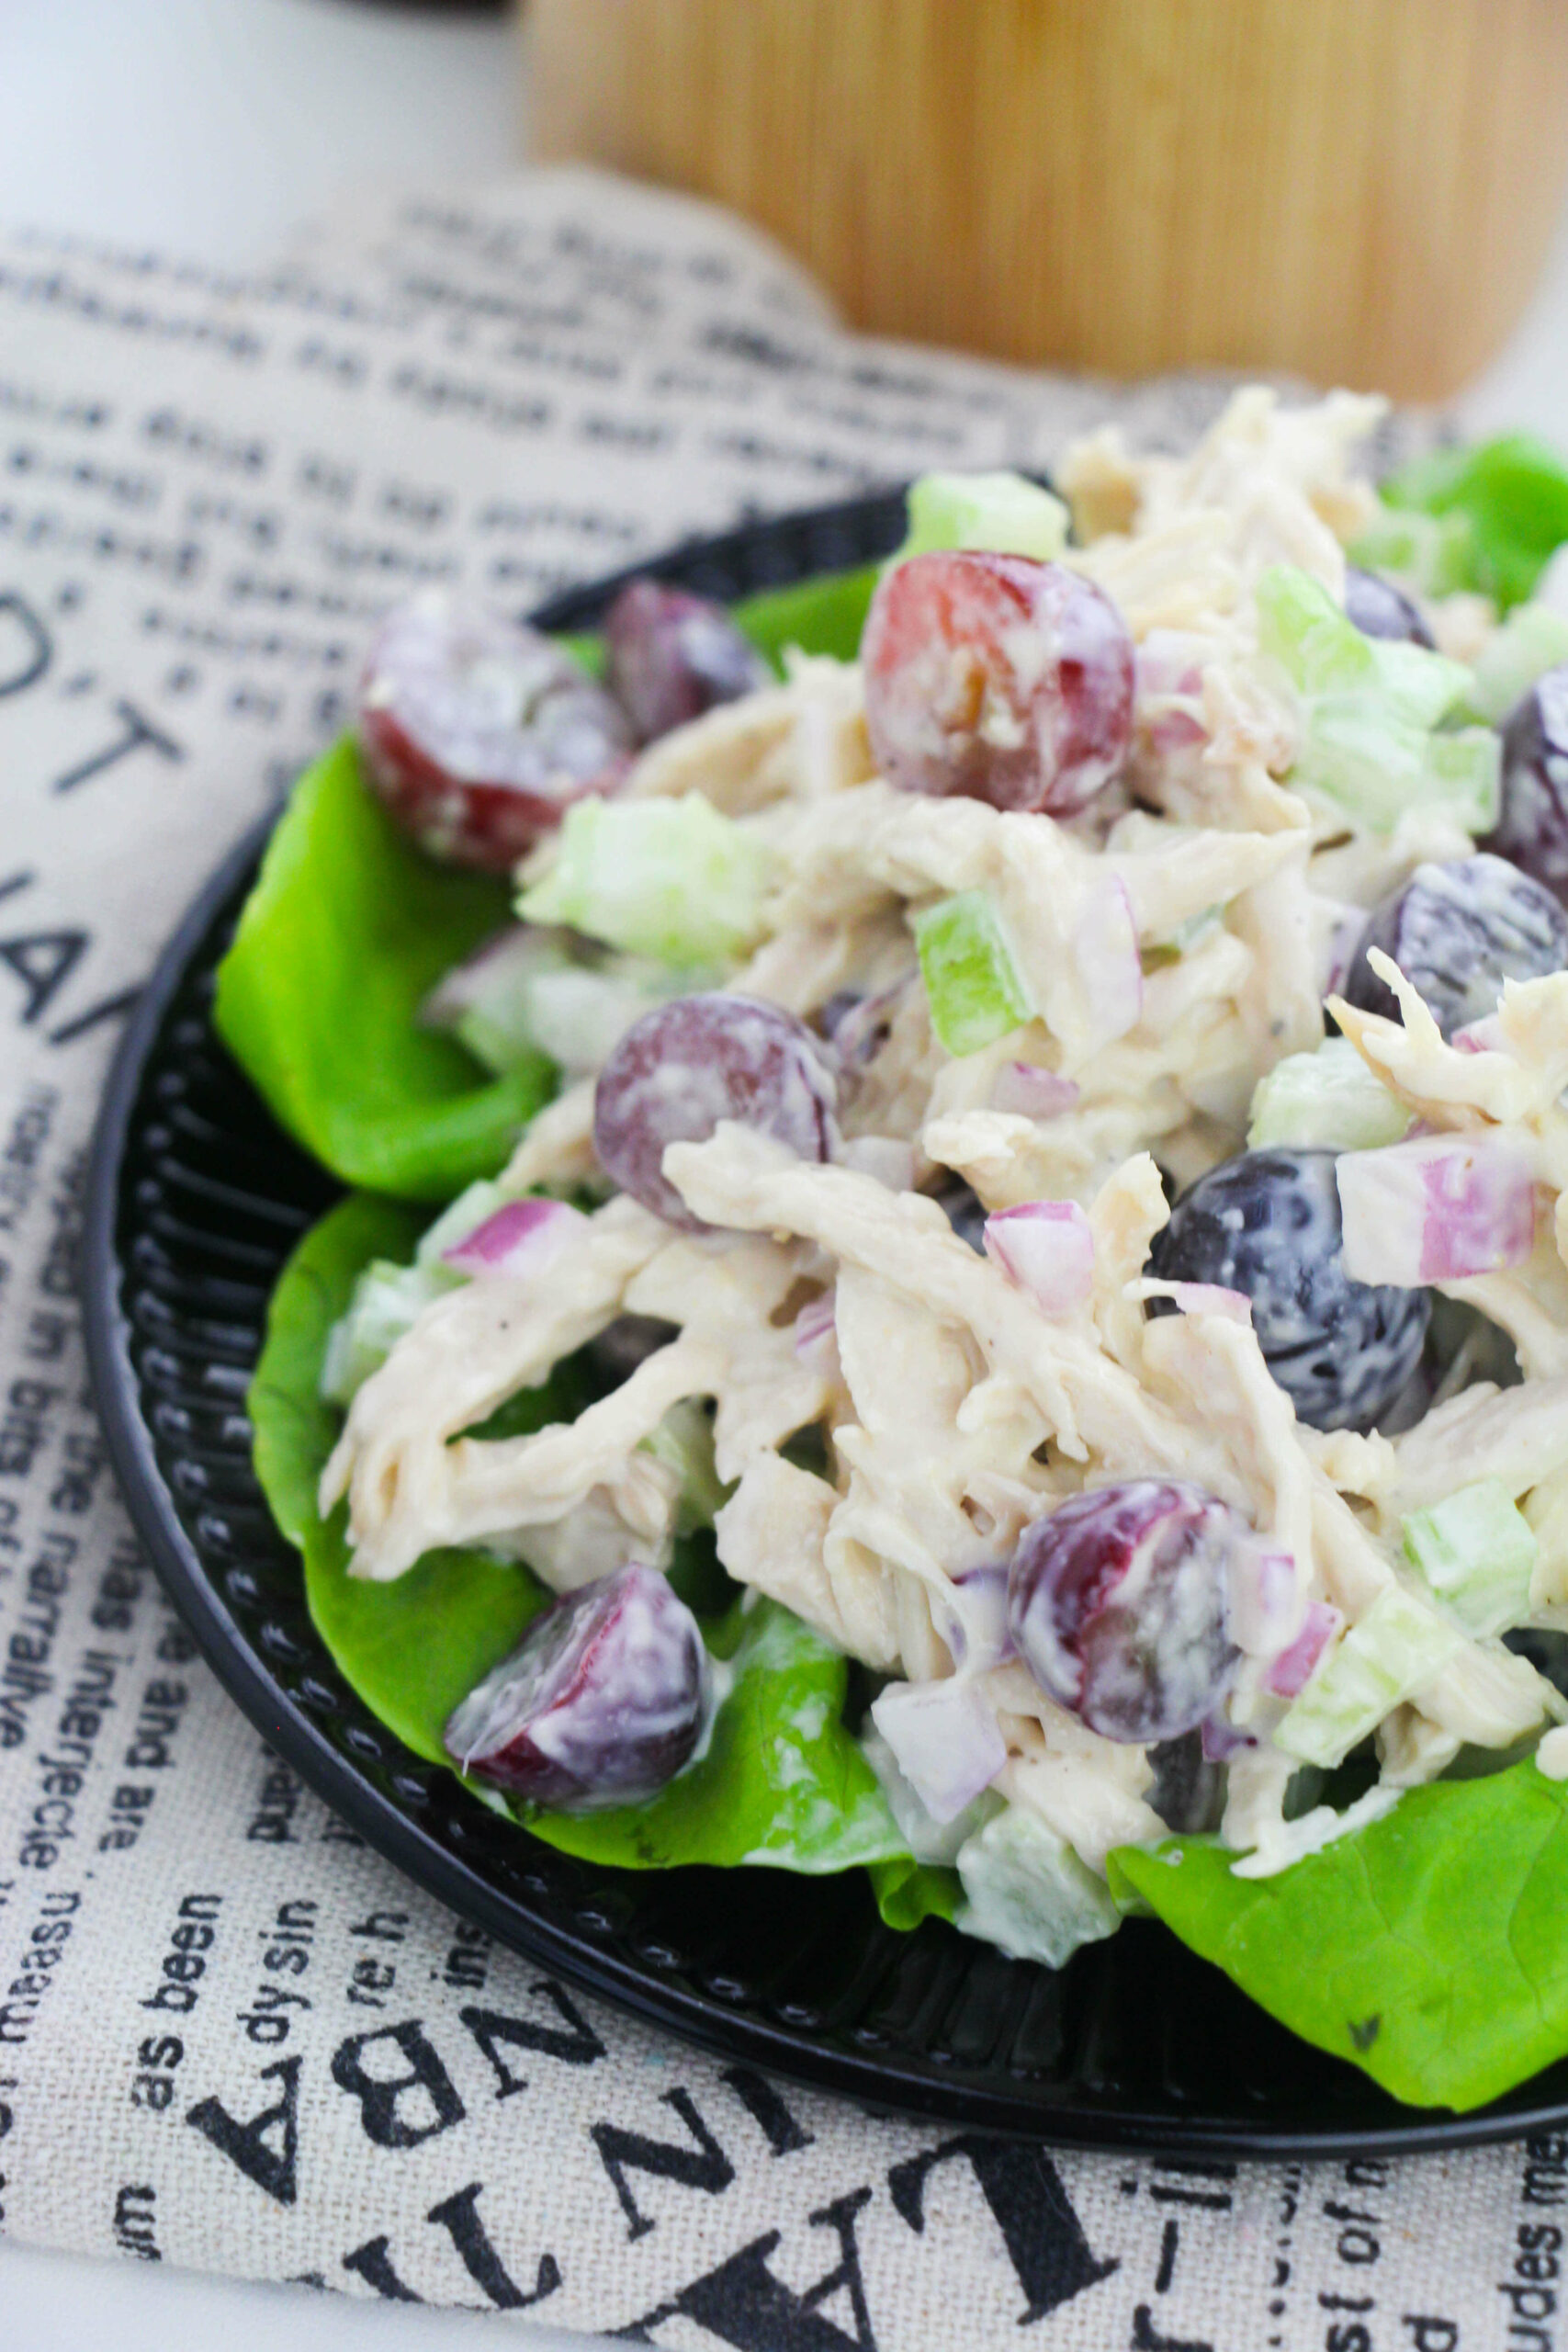 A side view of the chicken salad with grapes and almonds on a bed of greens.